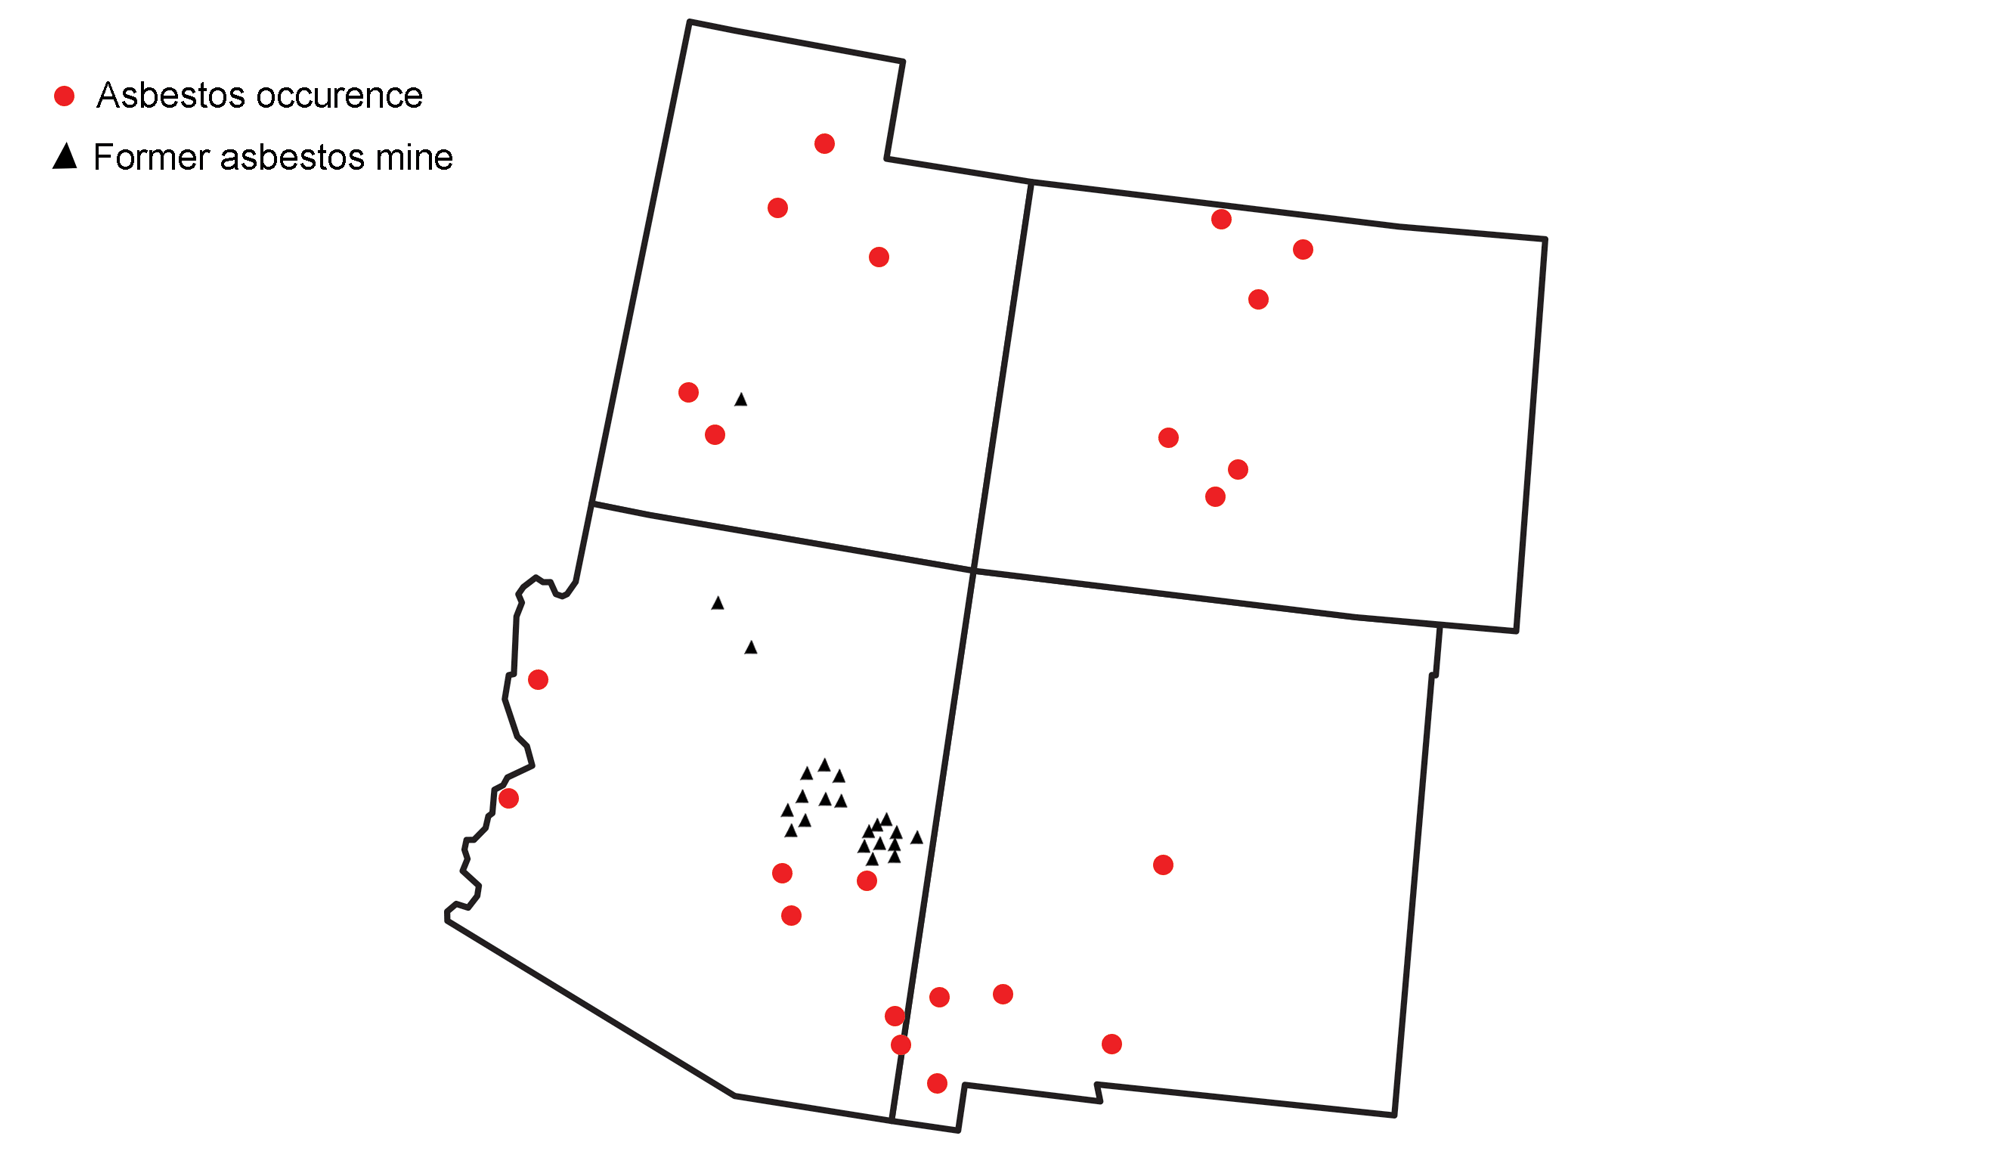 Map showing the occurrences of asbestos and former asbestos mines in the southwestern United States.